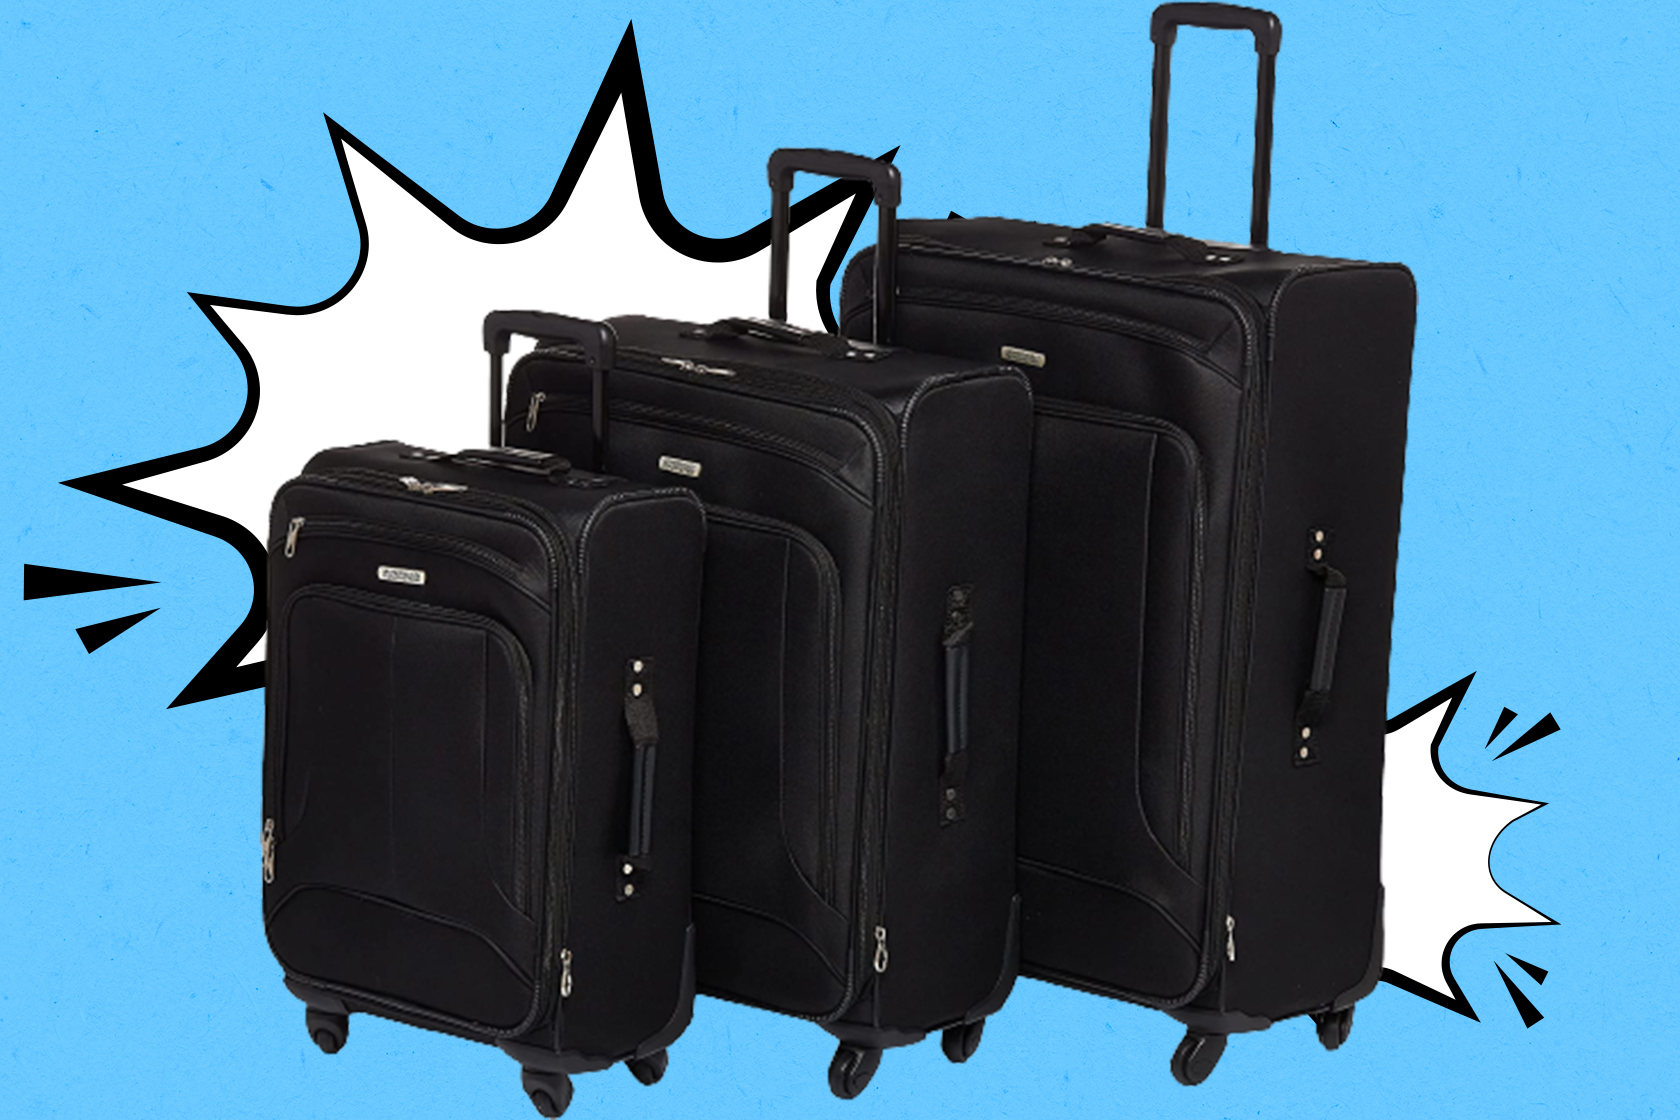 Gnide støbt Legepladsudstyr Snag a 3-piece American Tourister luggage set for 56% off on Amazon